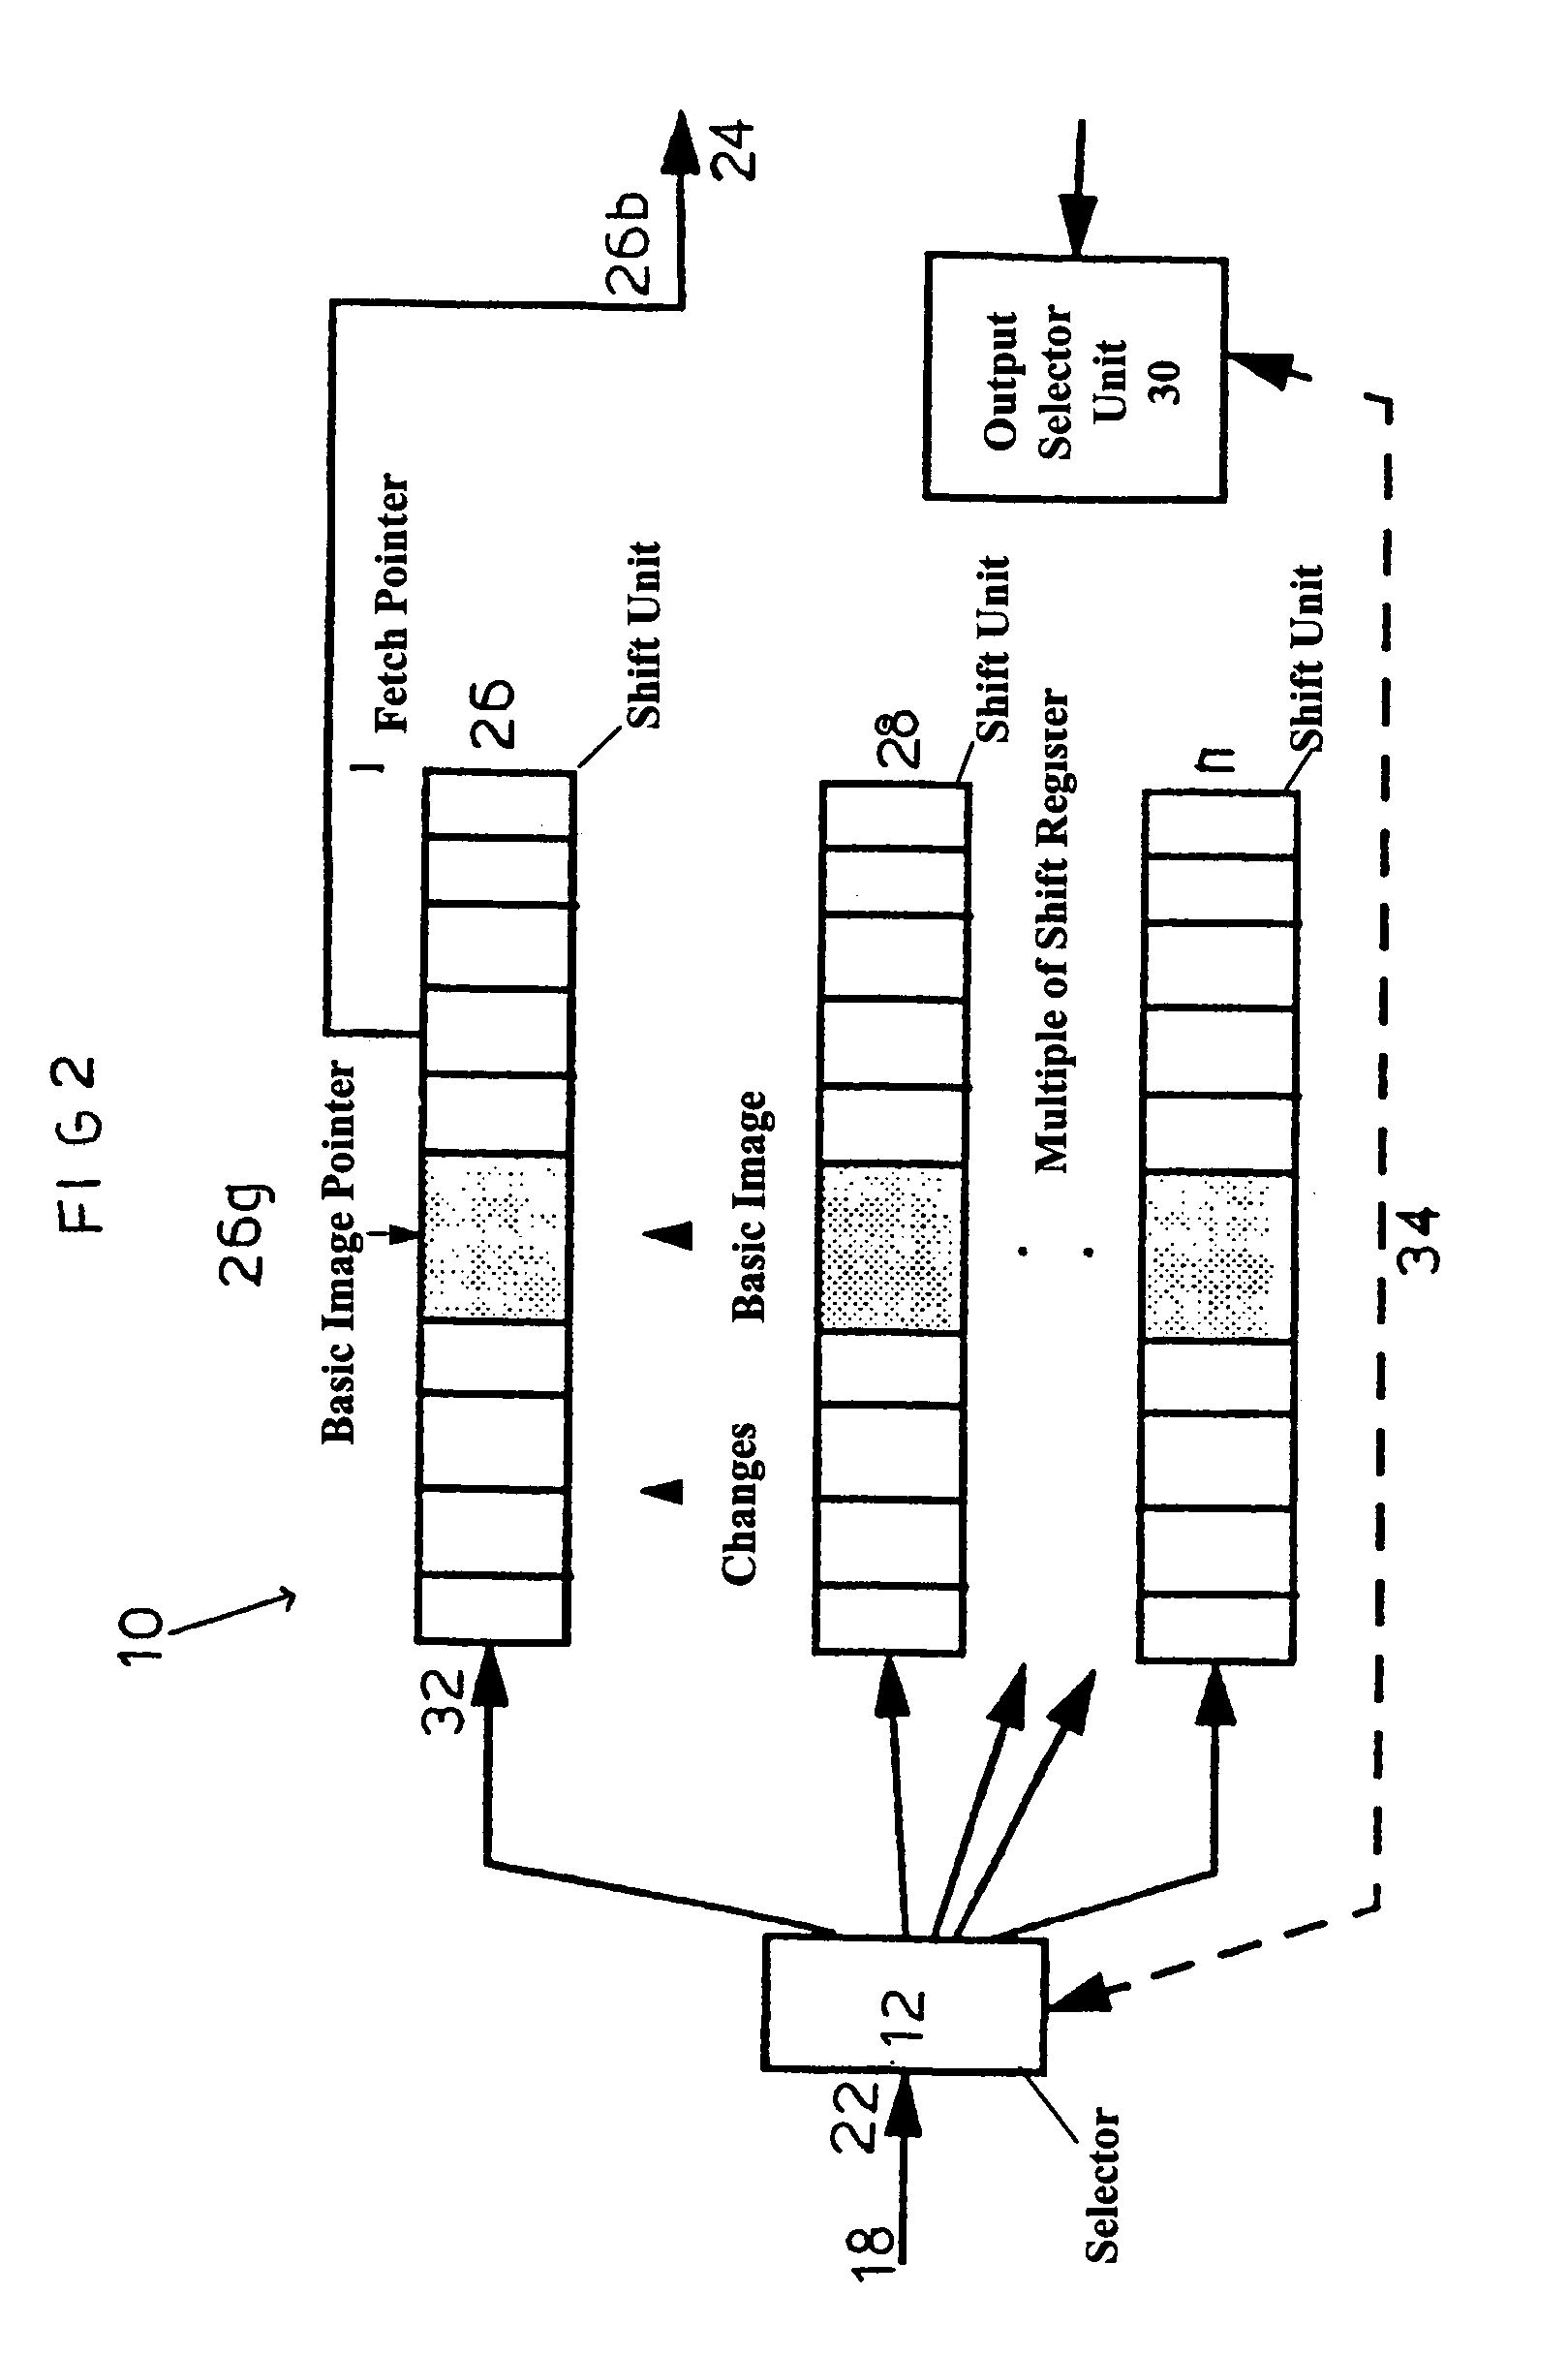 Device for changing channels in a digital television reception system